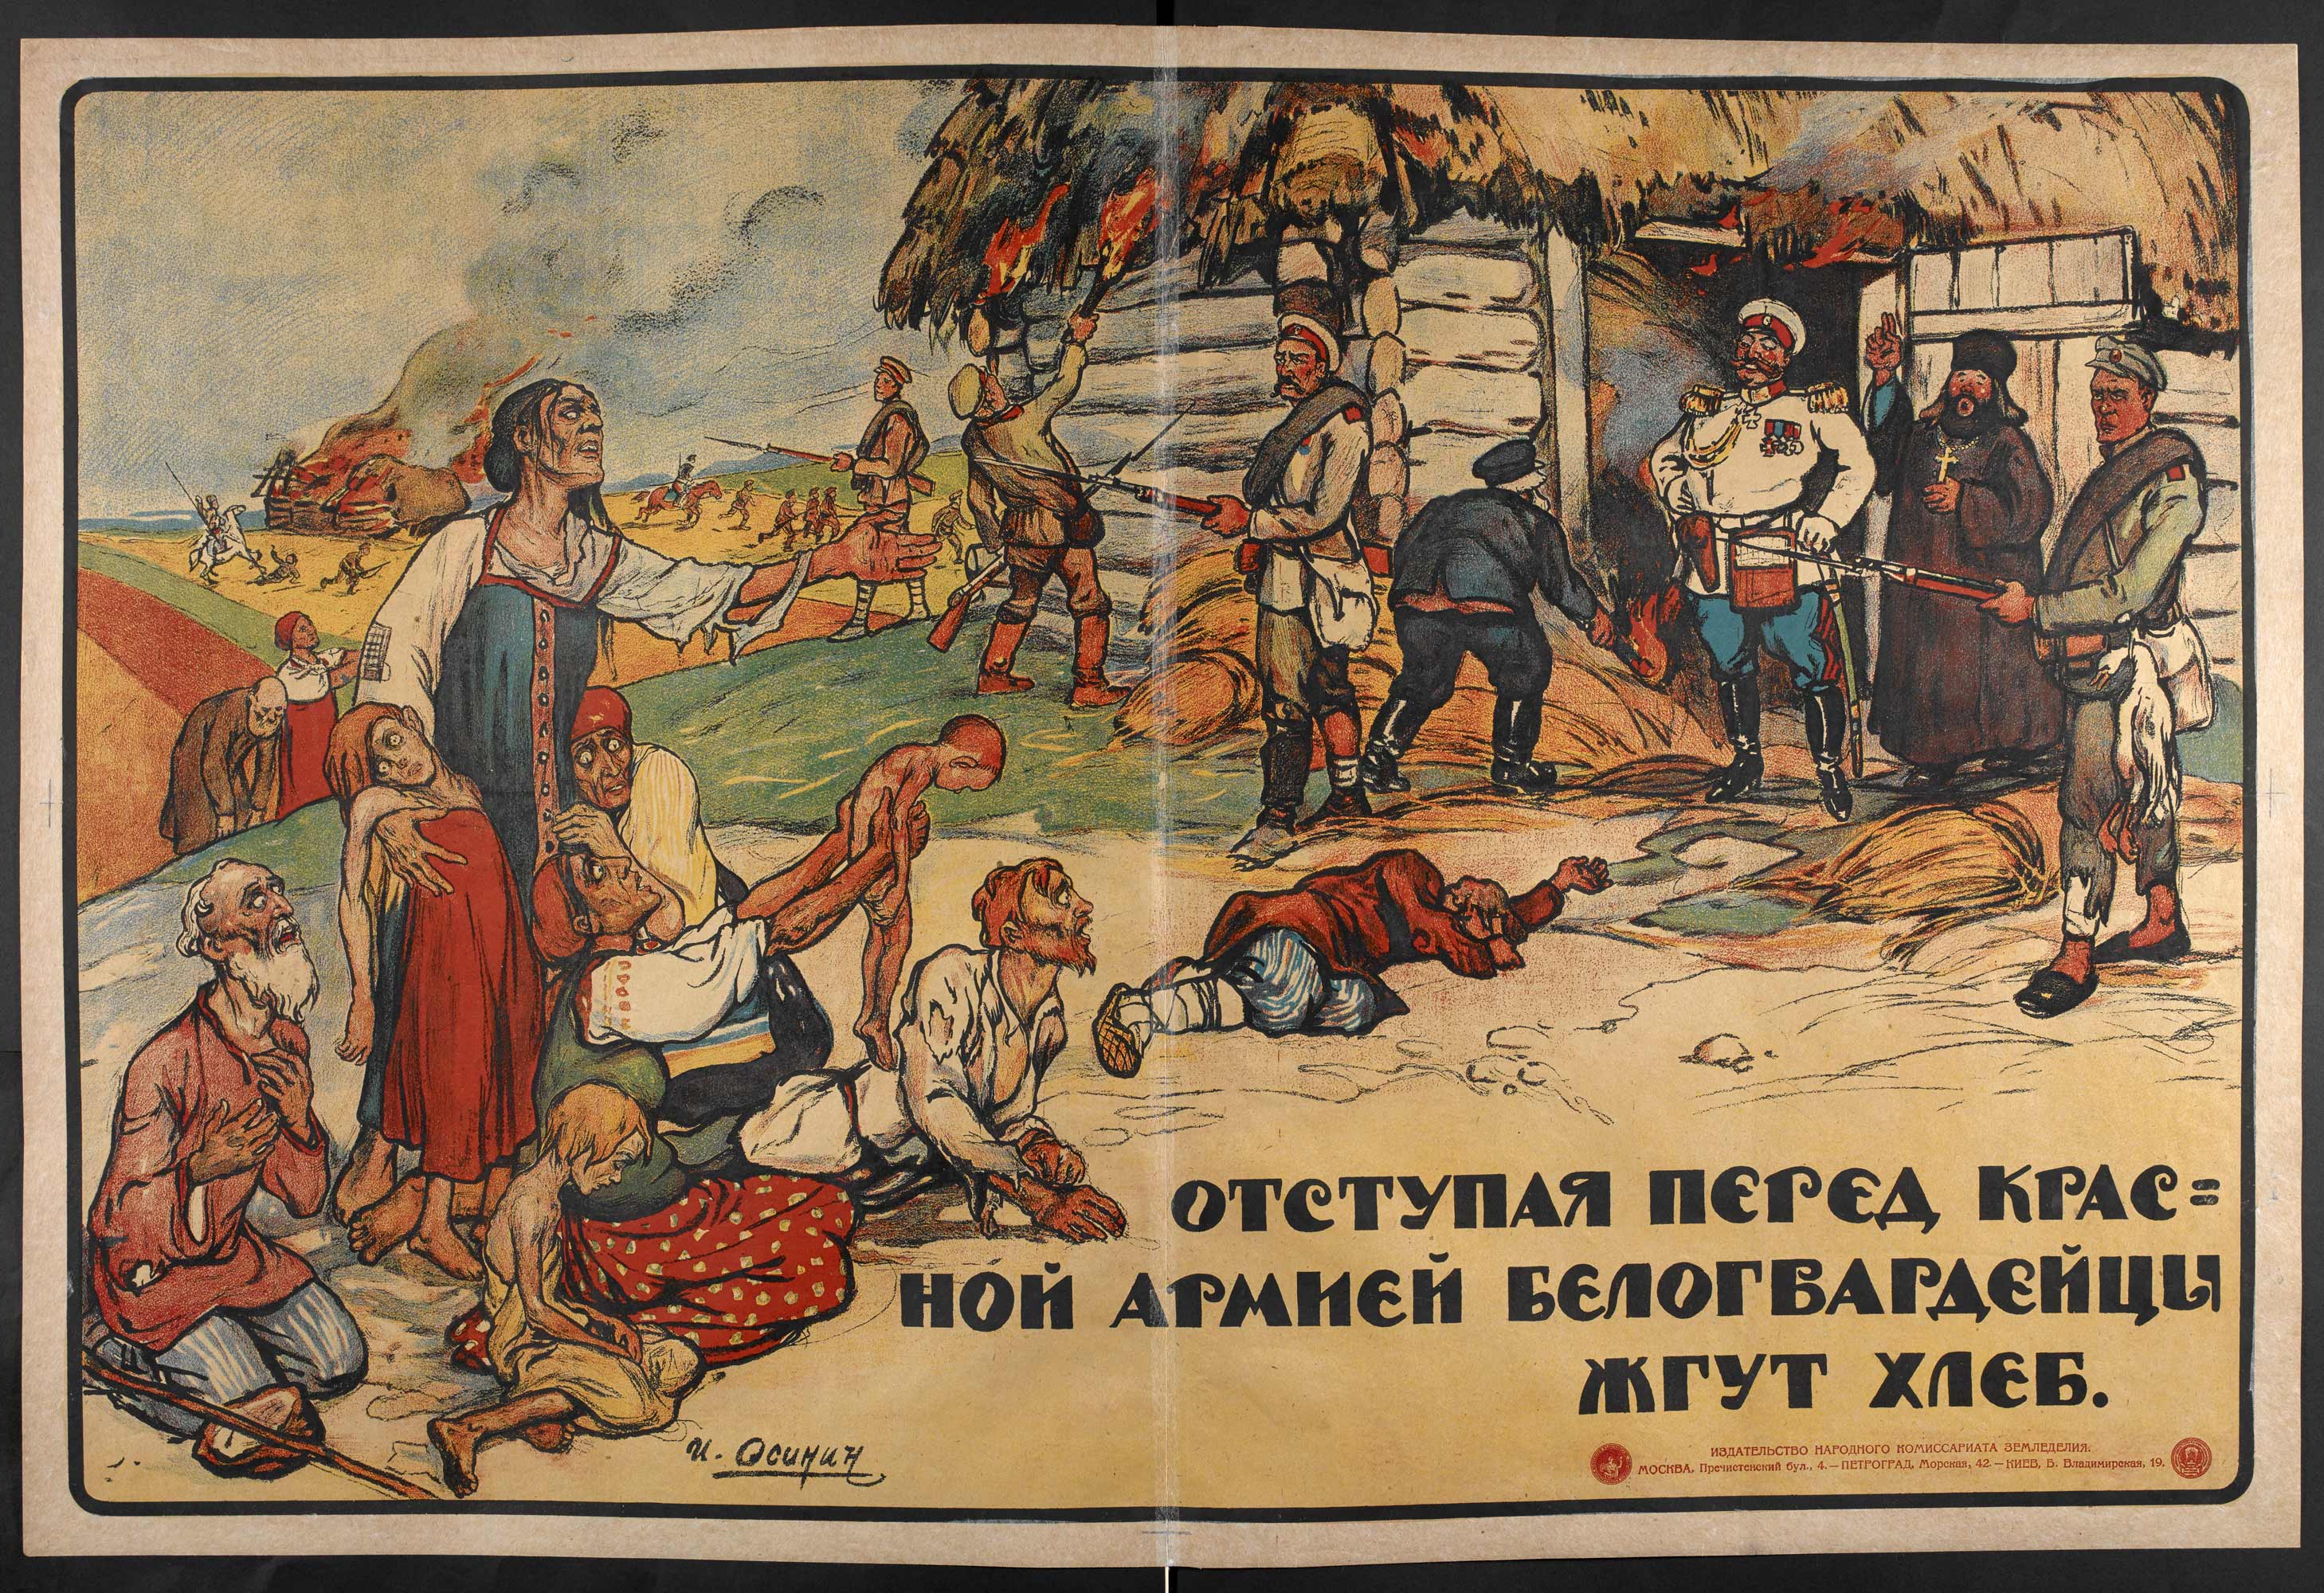 Soviet poster dramatizes the burning of the local peasants' barns and crops by the White Army.